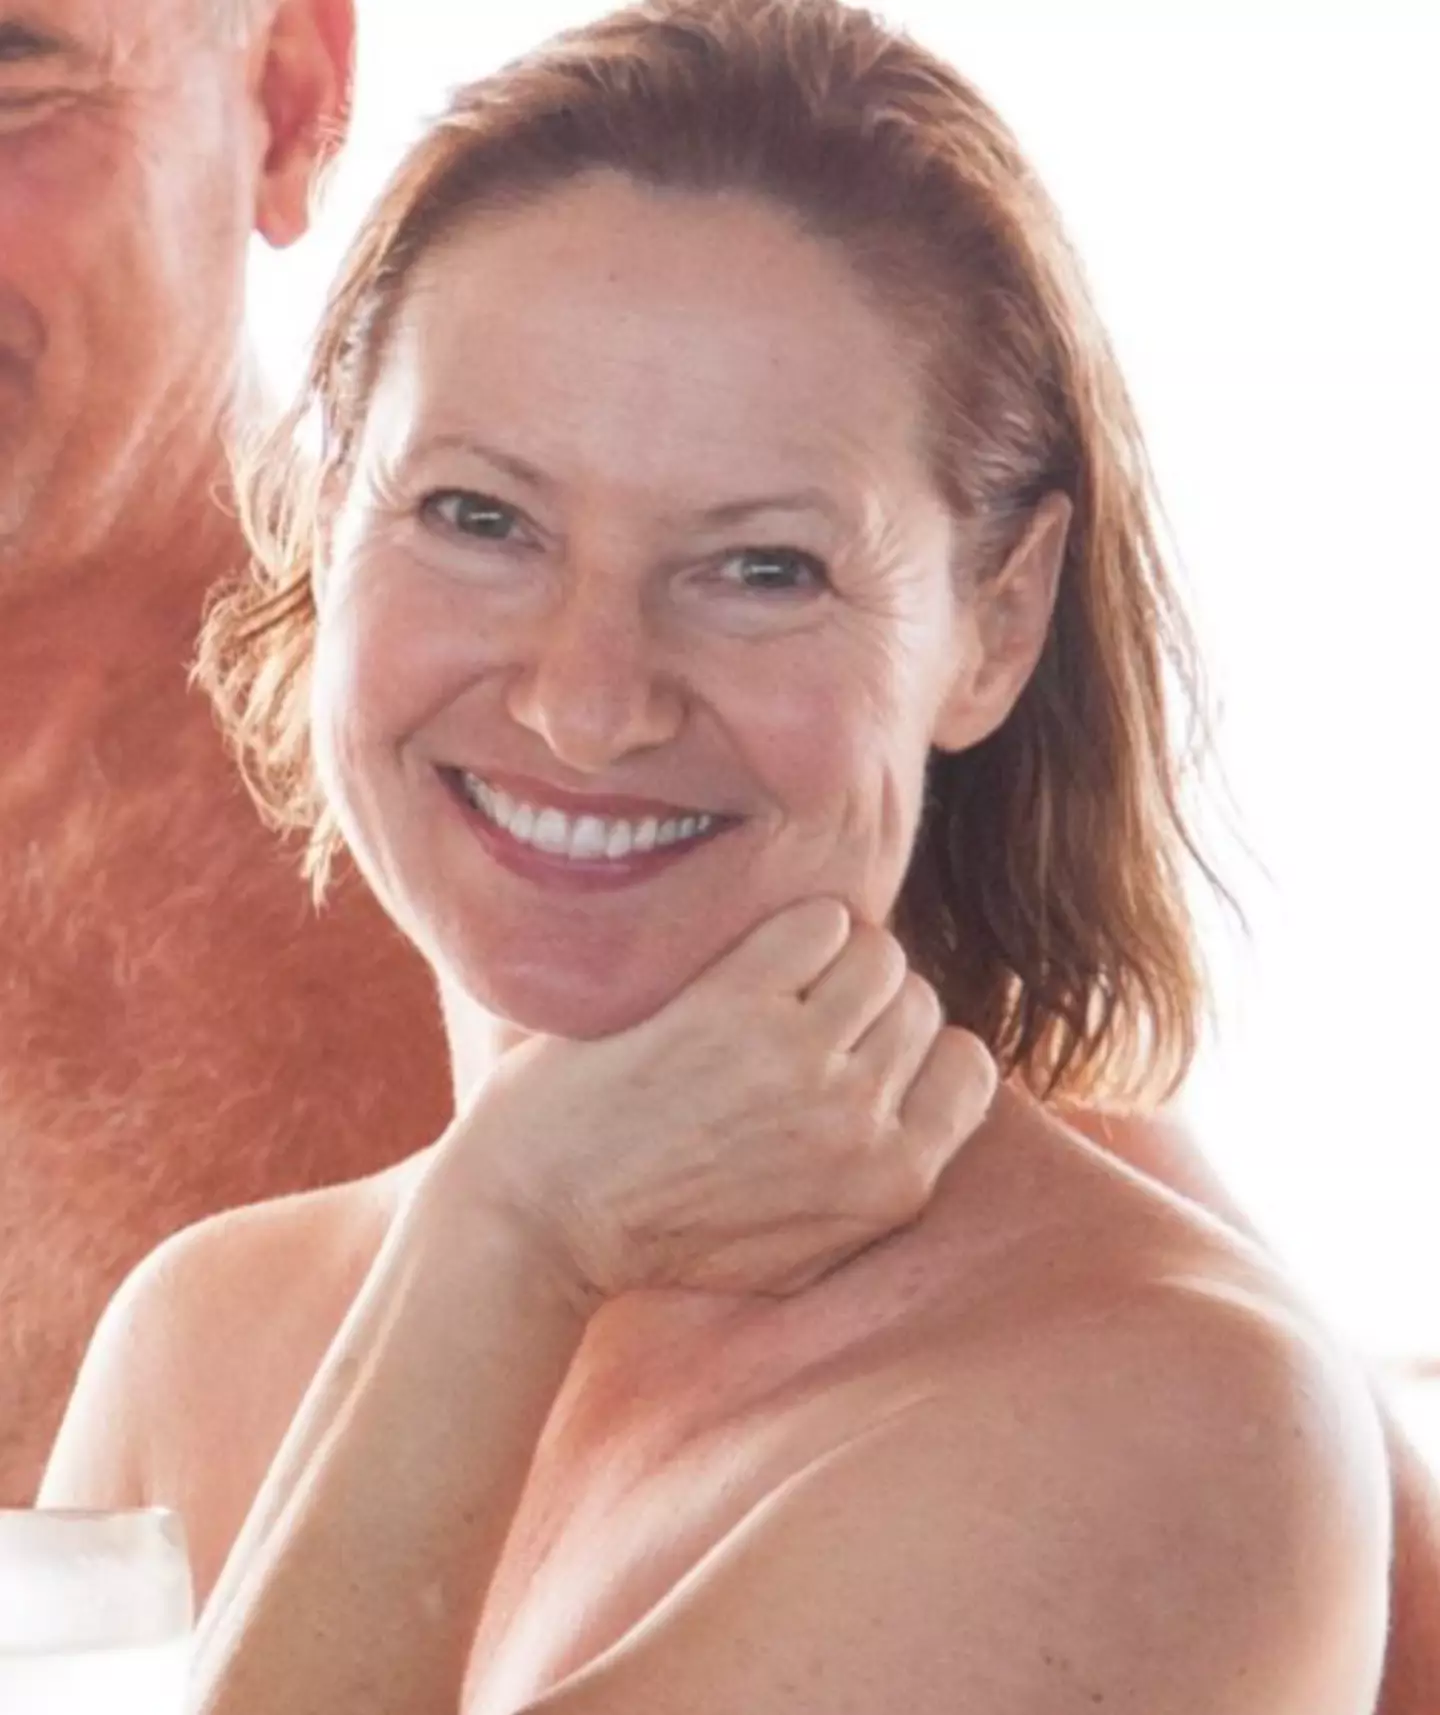 Kat Whitmire is a cruise organizer for the nudist-cruise company.